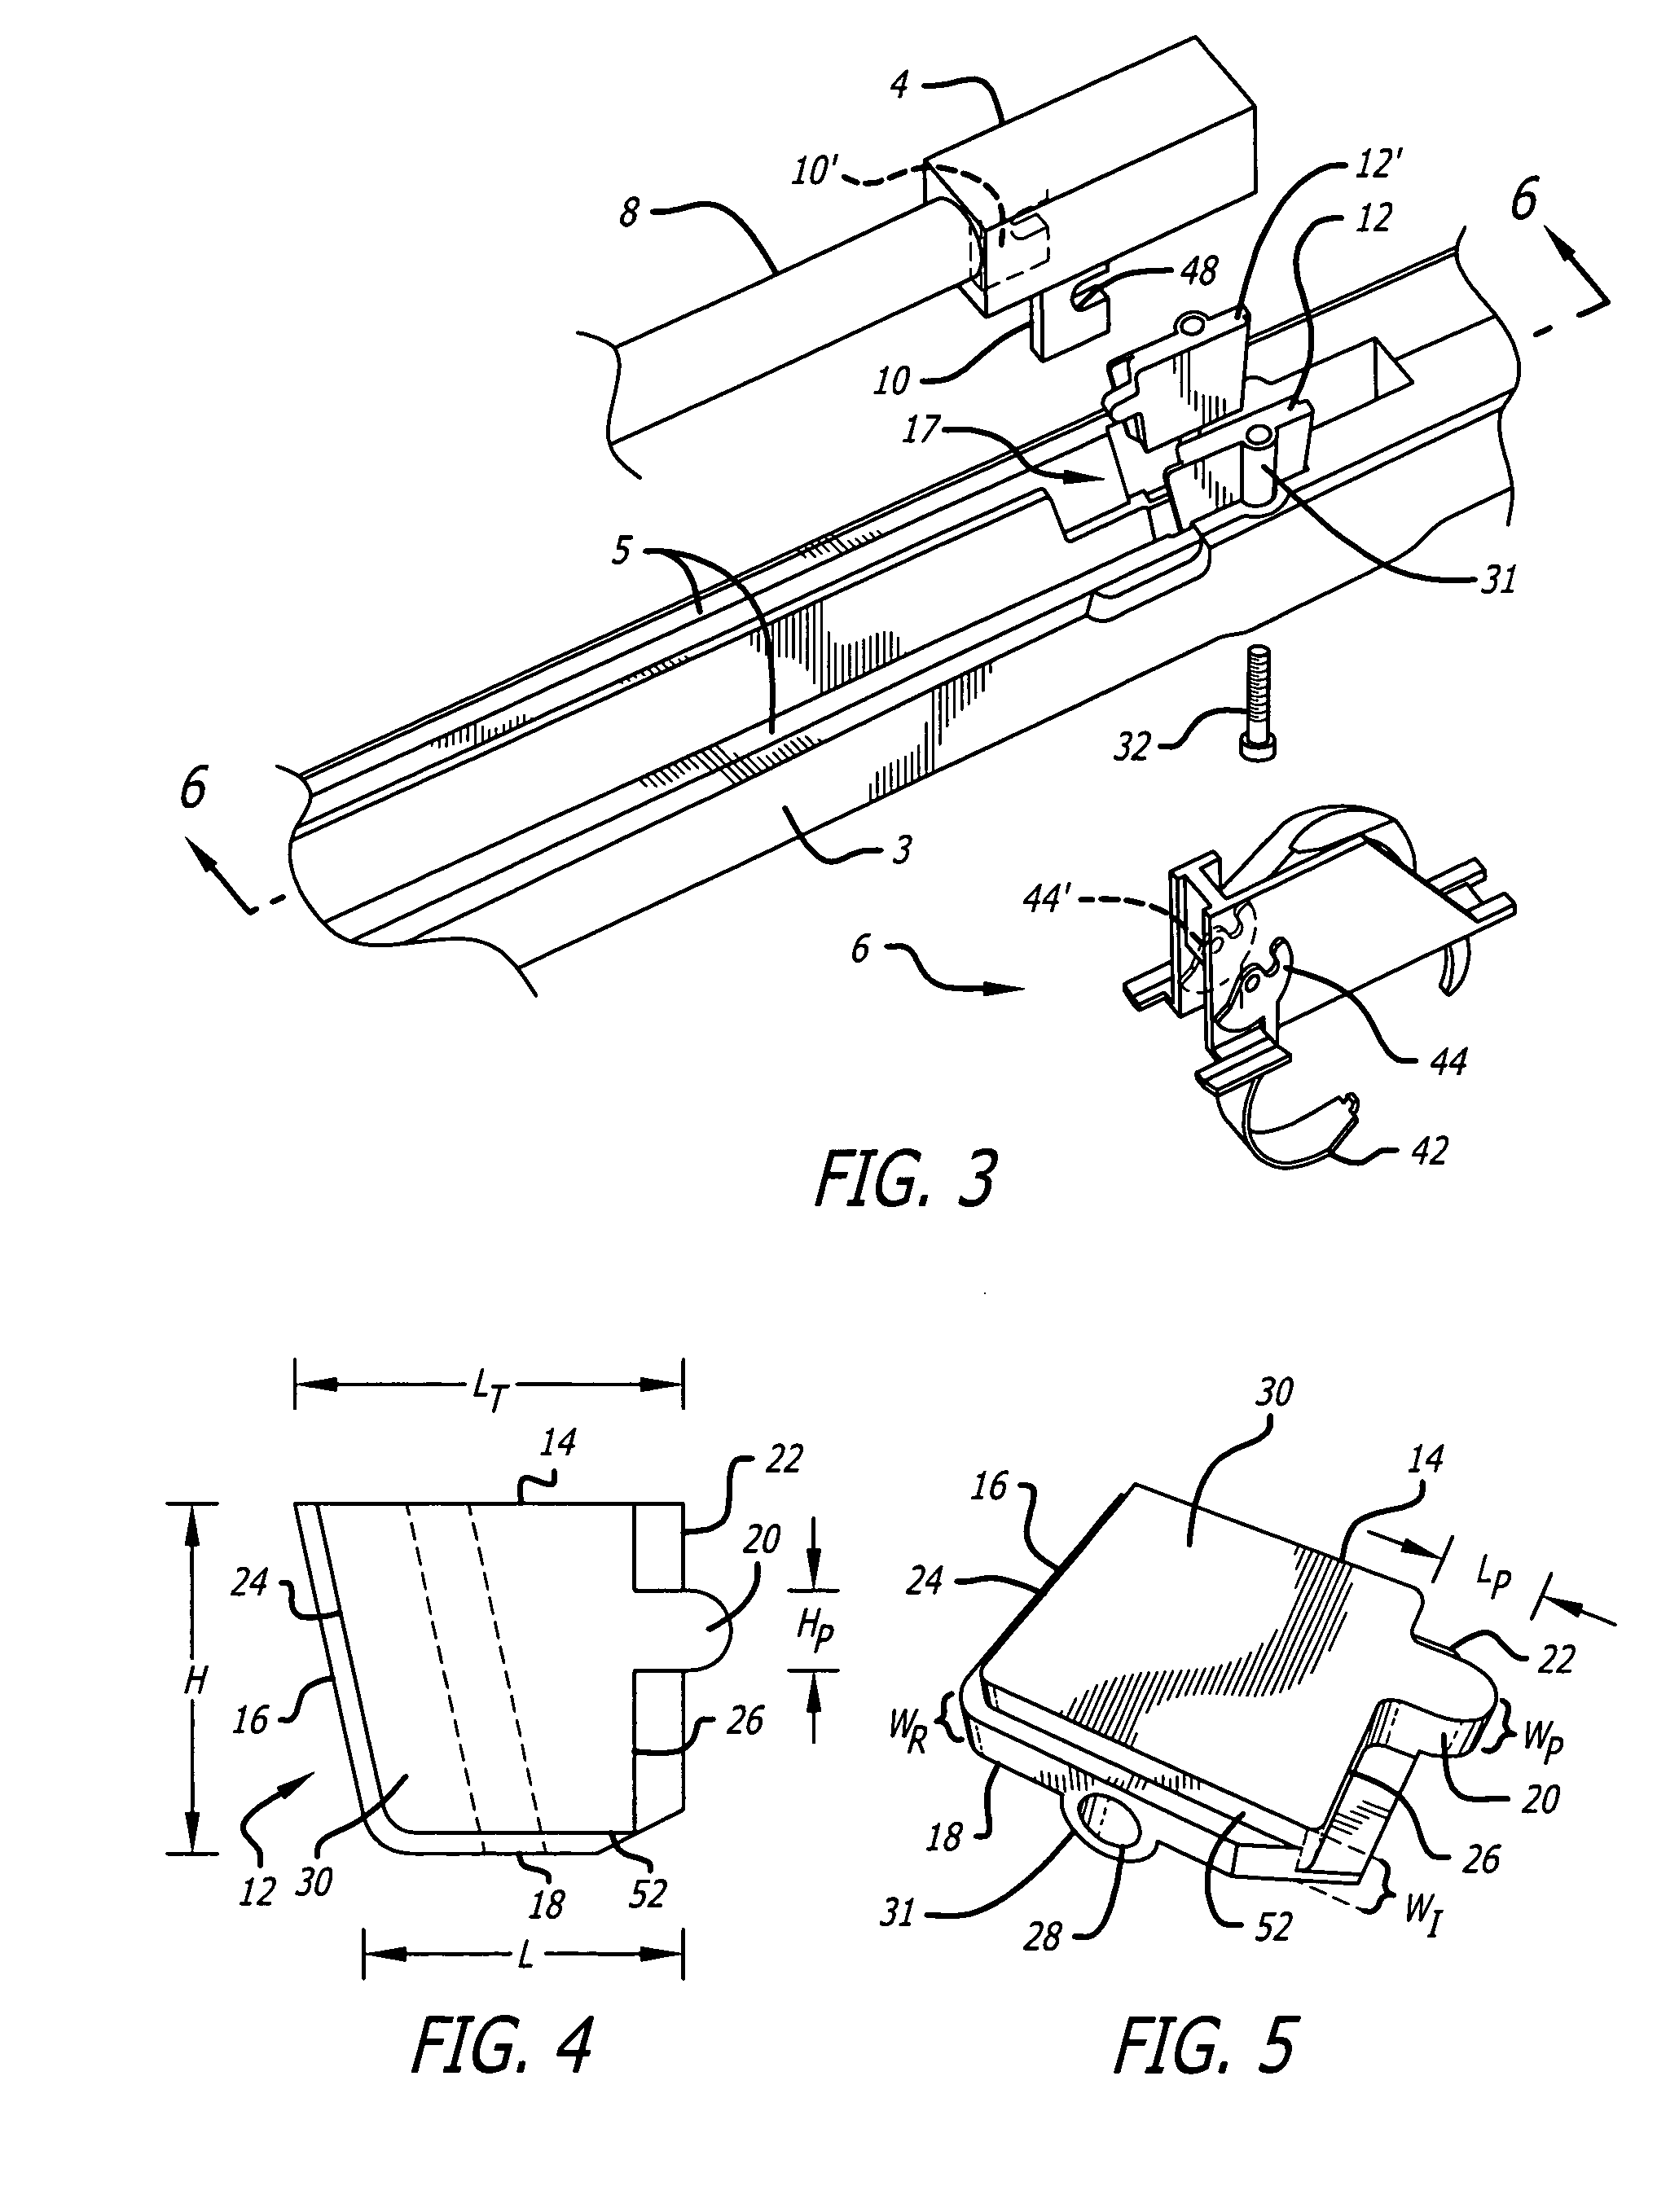 Firearm fastening assembly and method of use